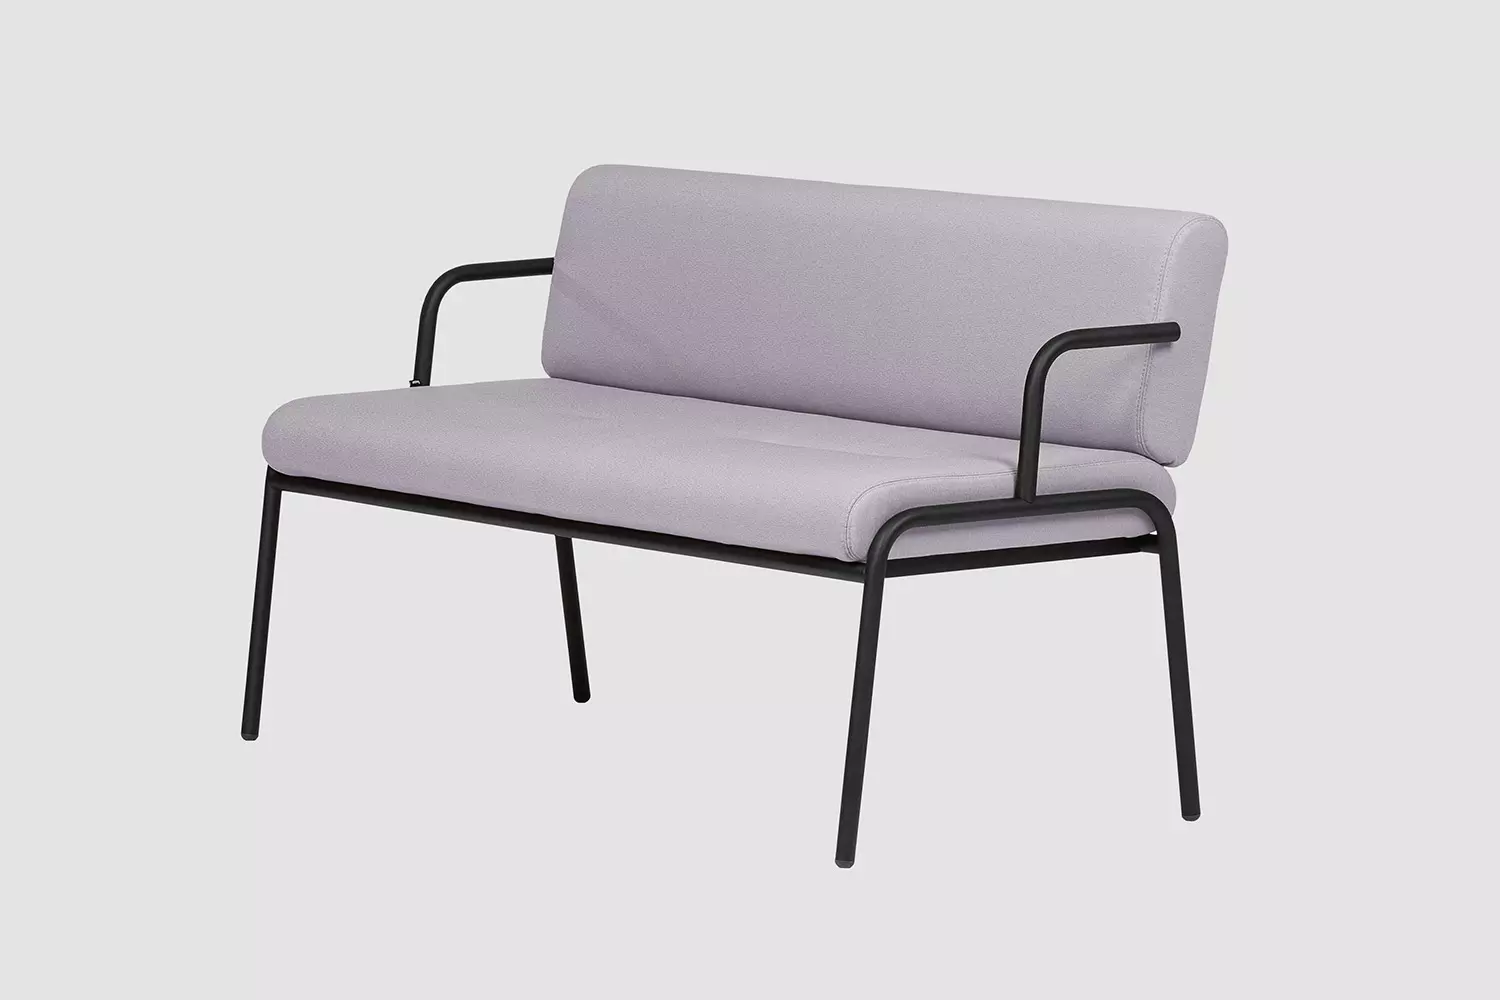 CASUAL Bench low, Outdoor Upholstered Without armrests With armrests Bench Modular system, Bene Office furniture, Image 1